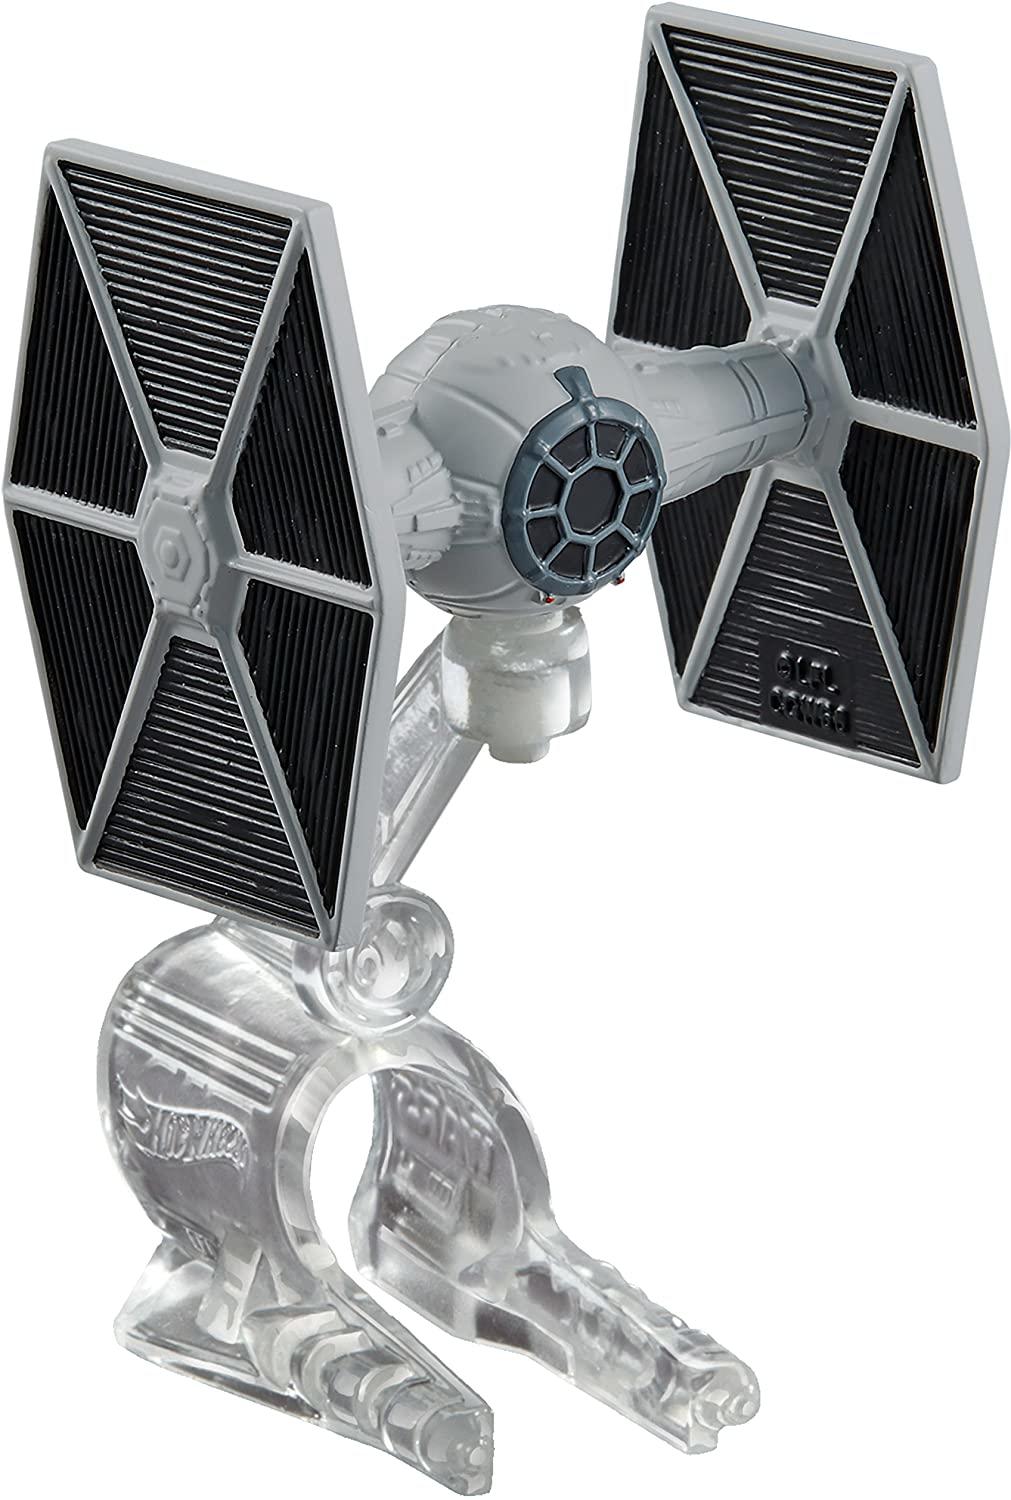 Star Wars Tie Fighter from the animated series from Disney,  made by Hot Wheels